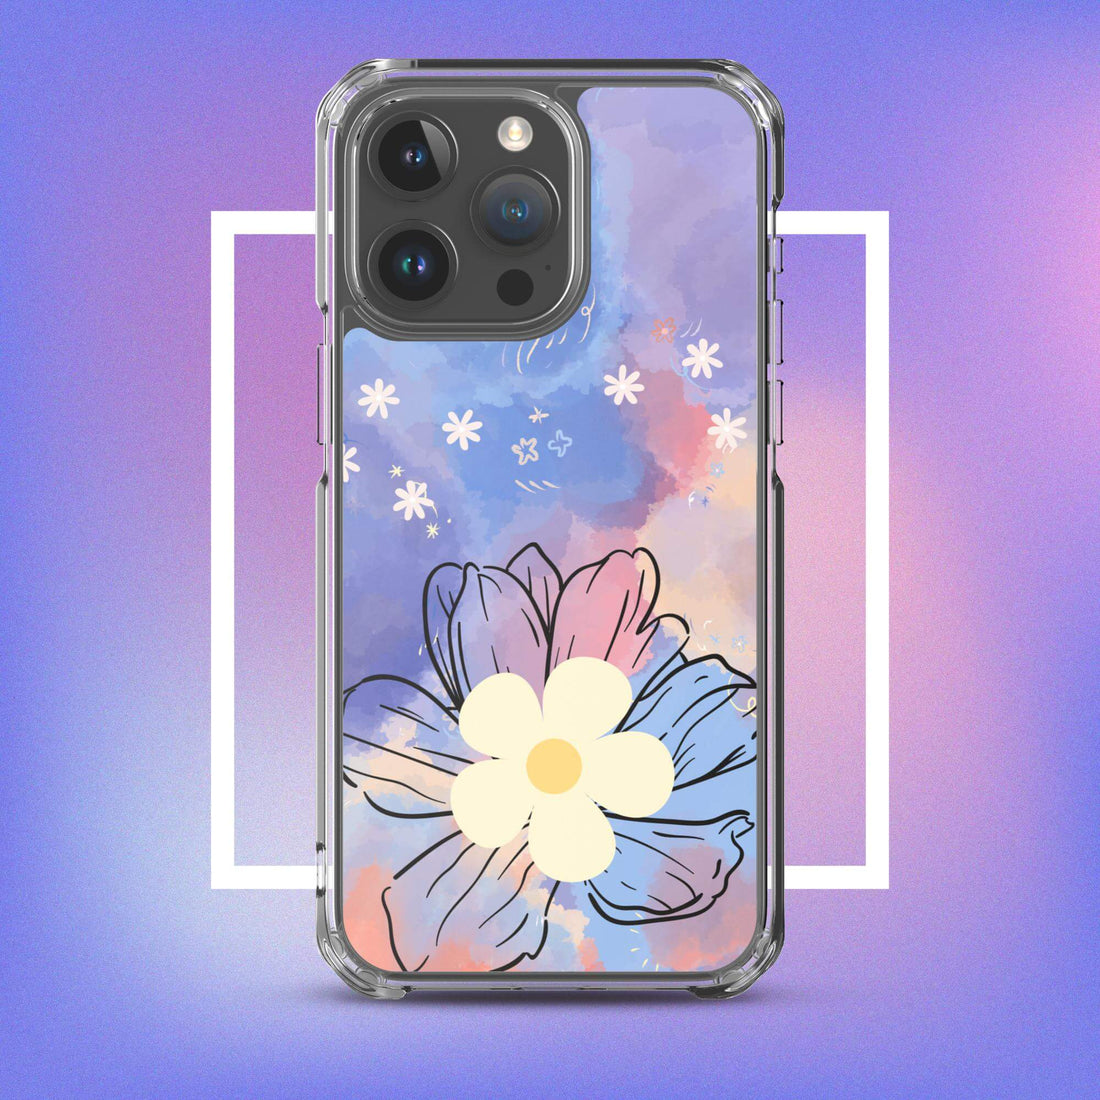 Shockproof Protective Iphone Case - Flower Galaxy, image, iPhone Case